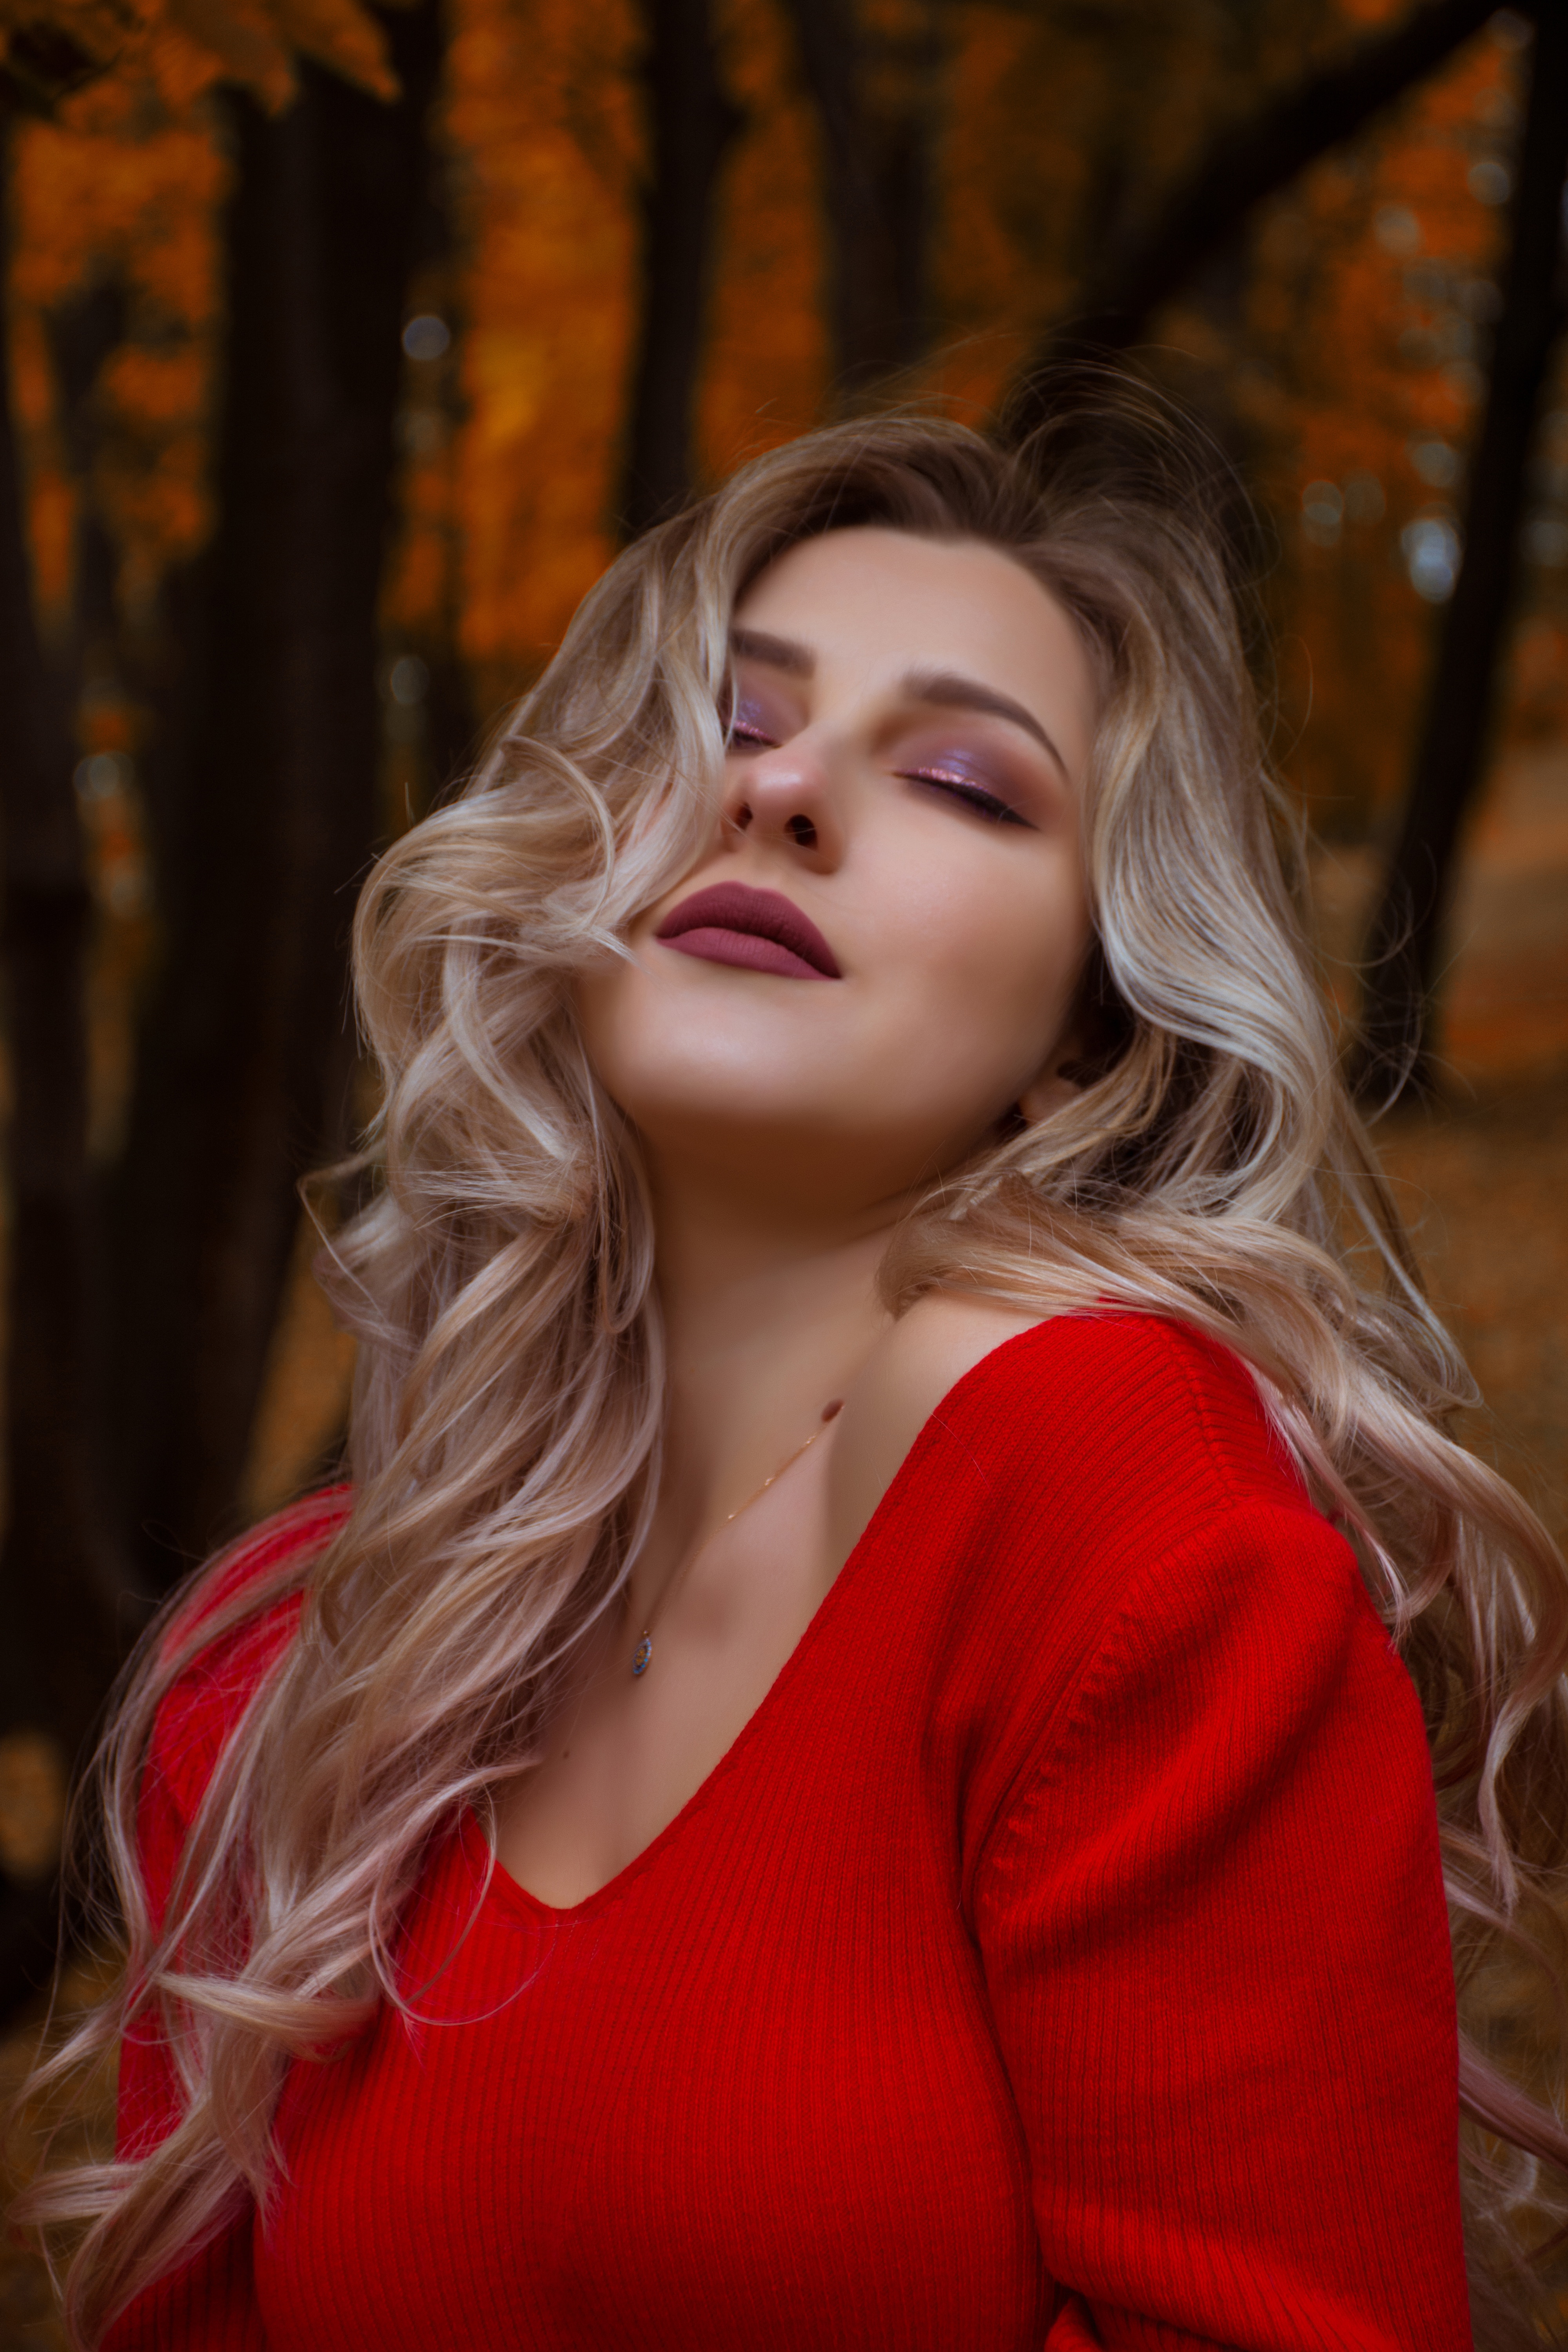 Women Model Photography Hair Hair On Chest Closed Eyes Smile Blonde Red Shirt 4000x6000